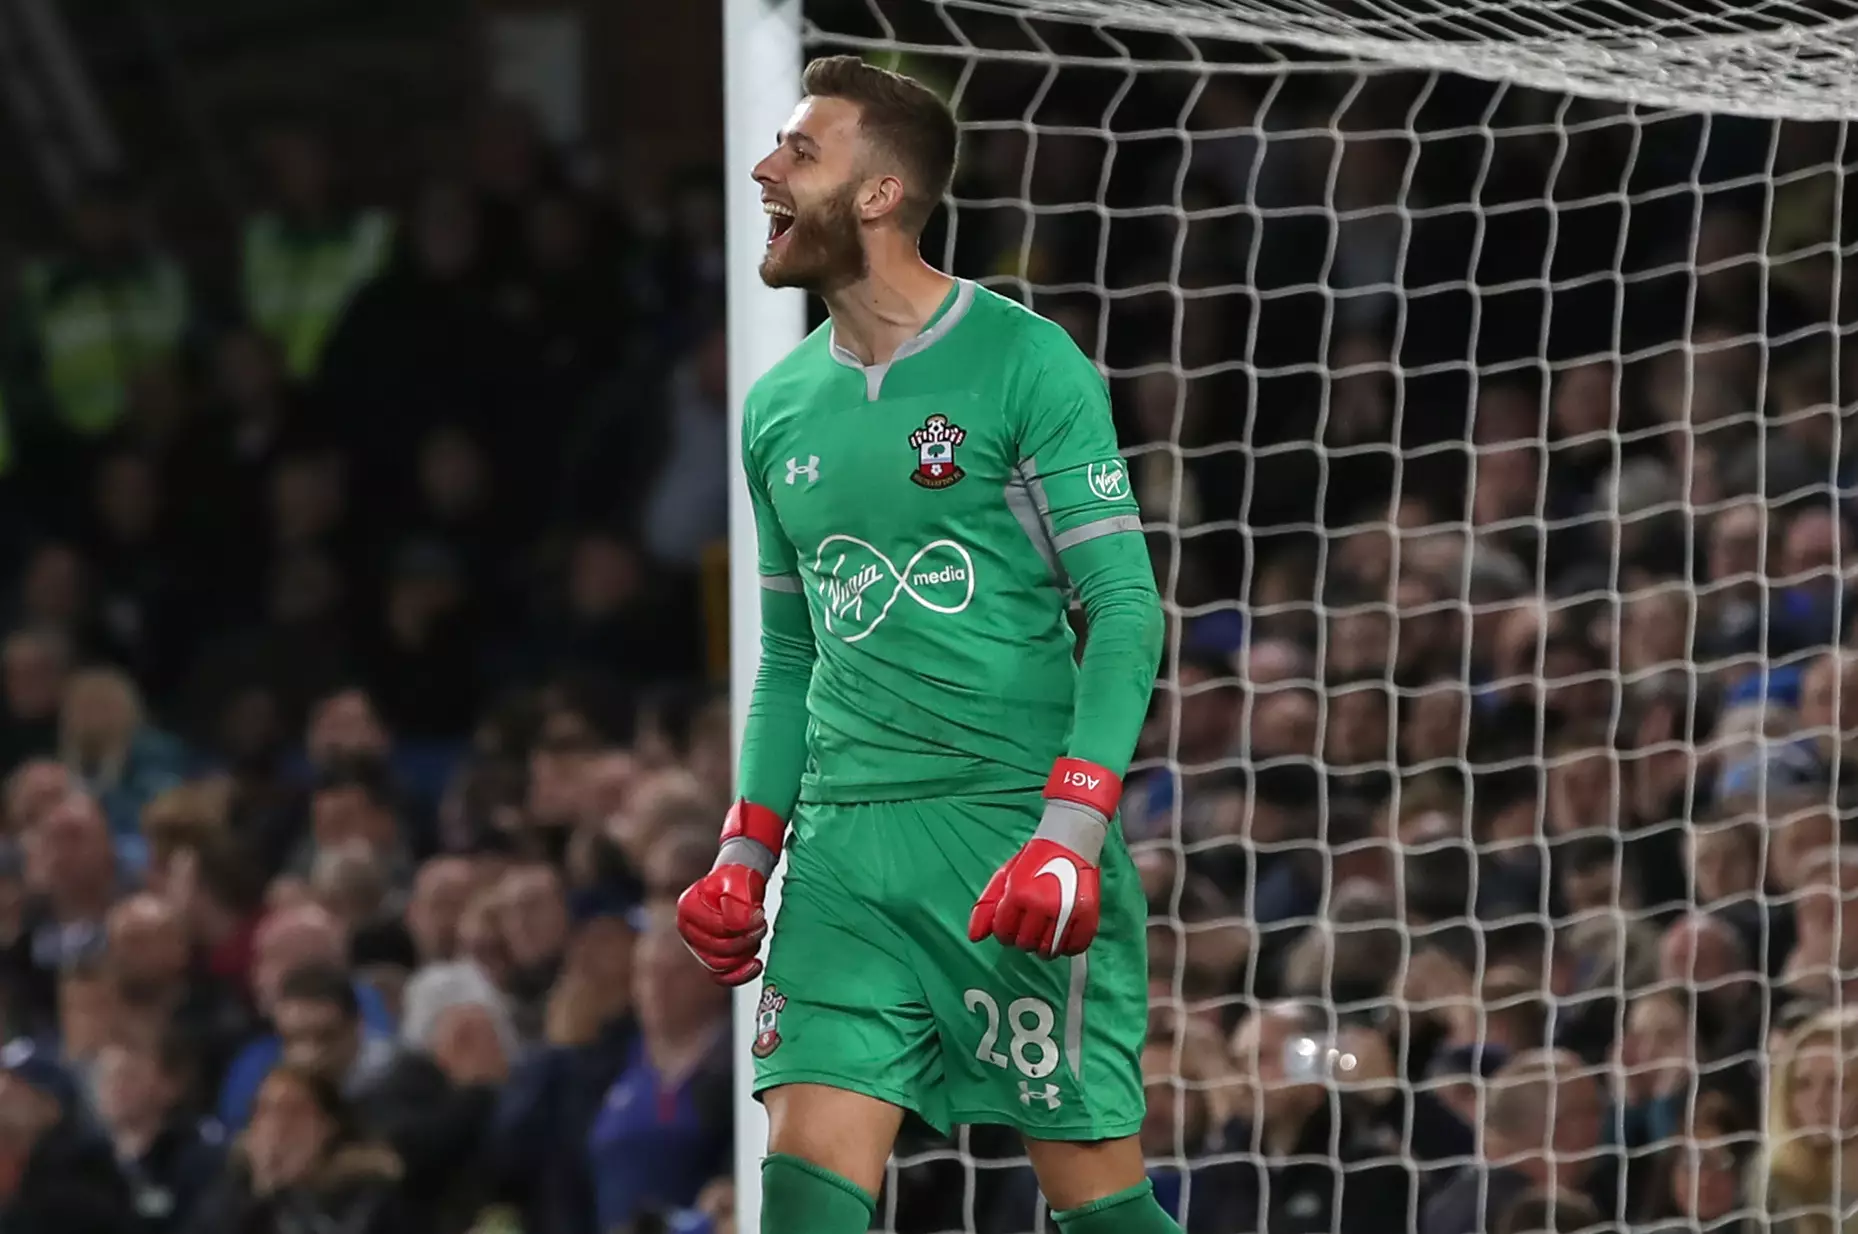 Angus Gunn made no appearances for City but already has two for Southampton since his £13 million summer move. Image: PA Images